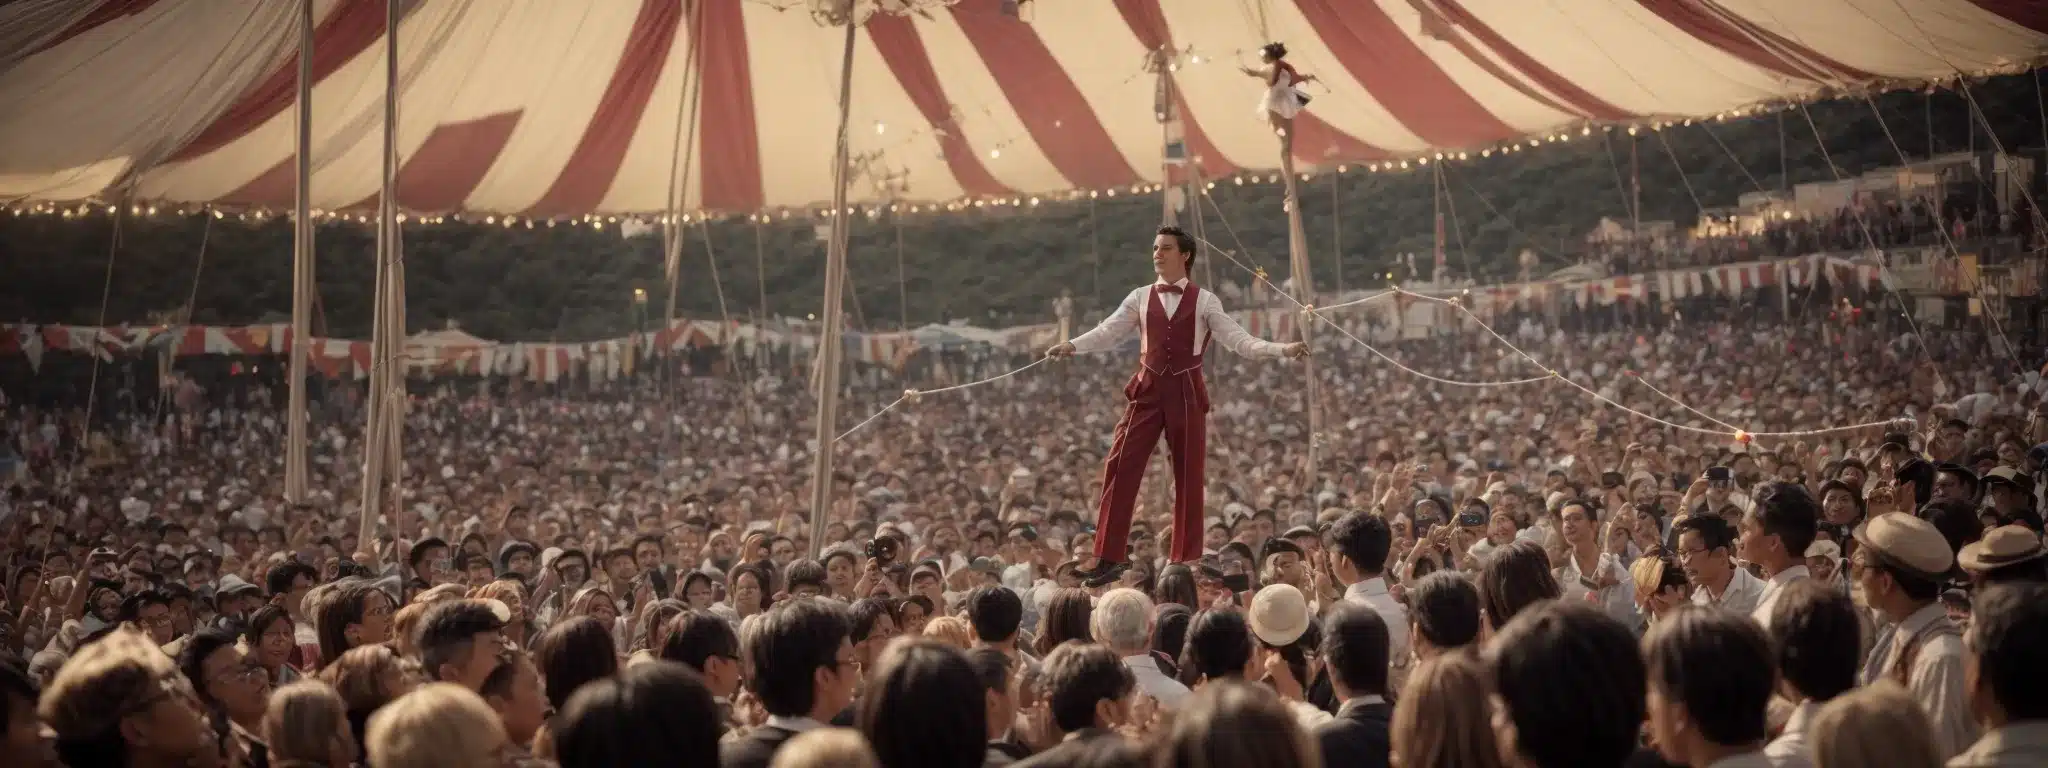 A Tightrope Walker Performs Skillfully Above An Enthralled Crowd Under The Big Top, Symbolizing The Marketer'S Balance Of Consumer Perceptions To Enhance Brand Value.